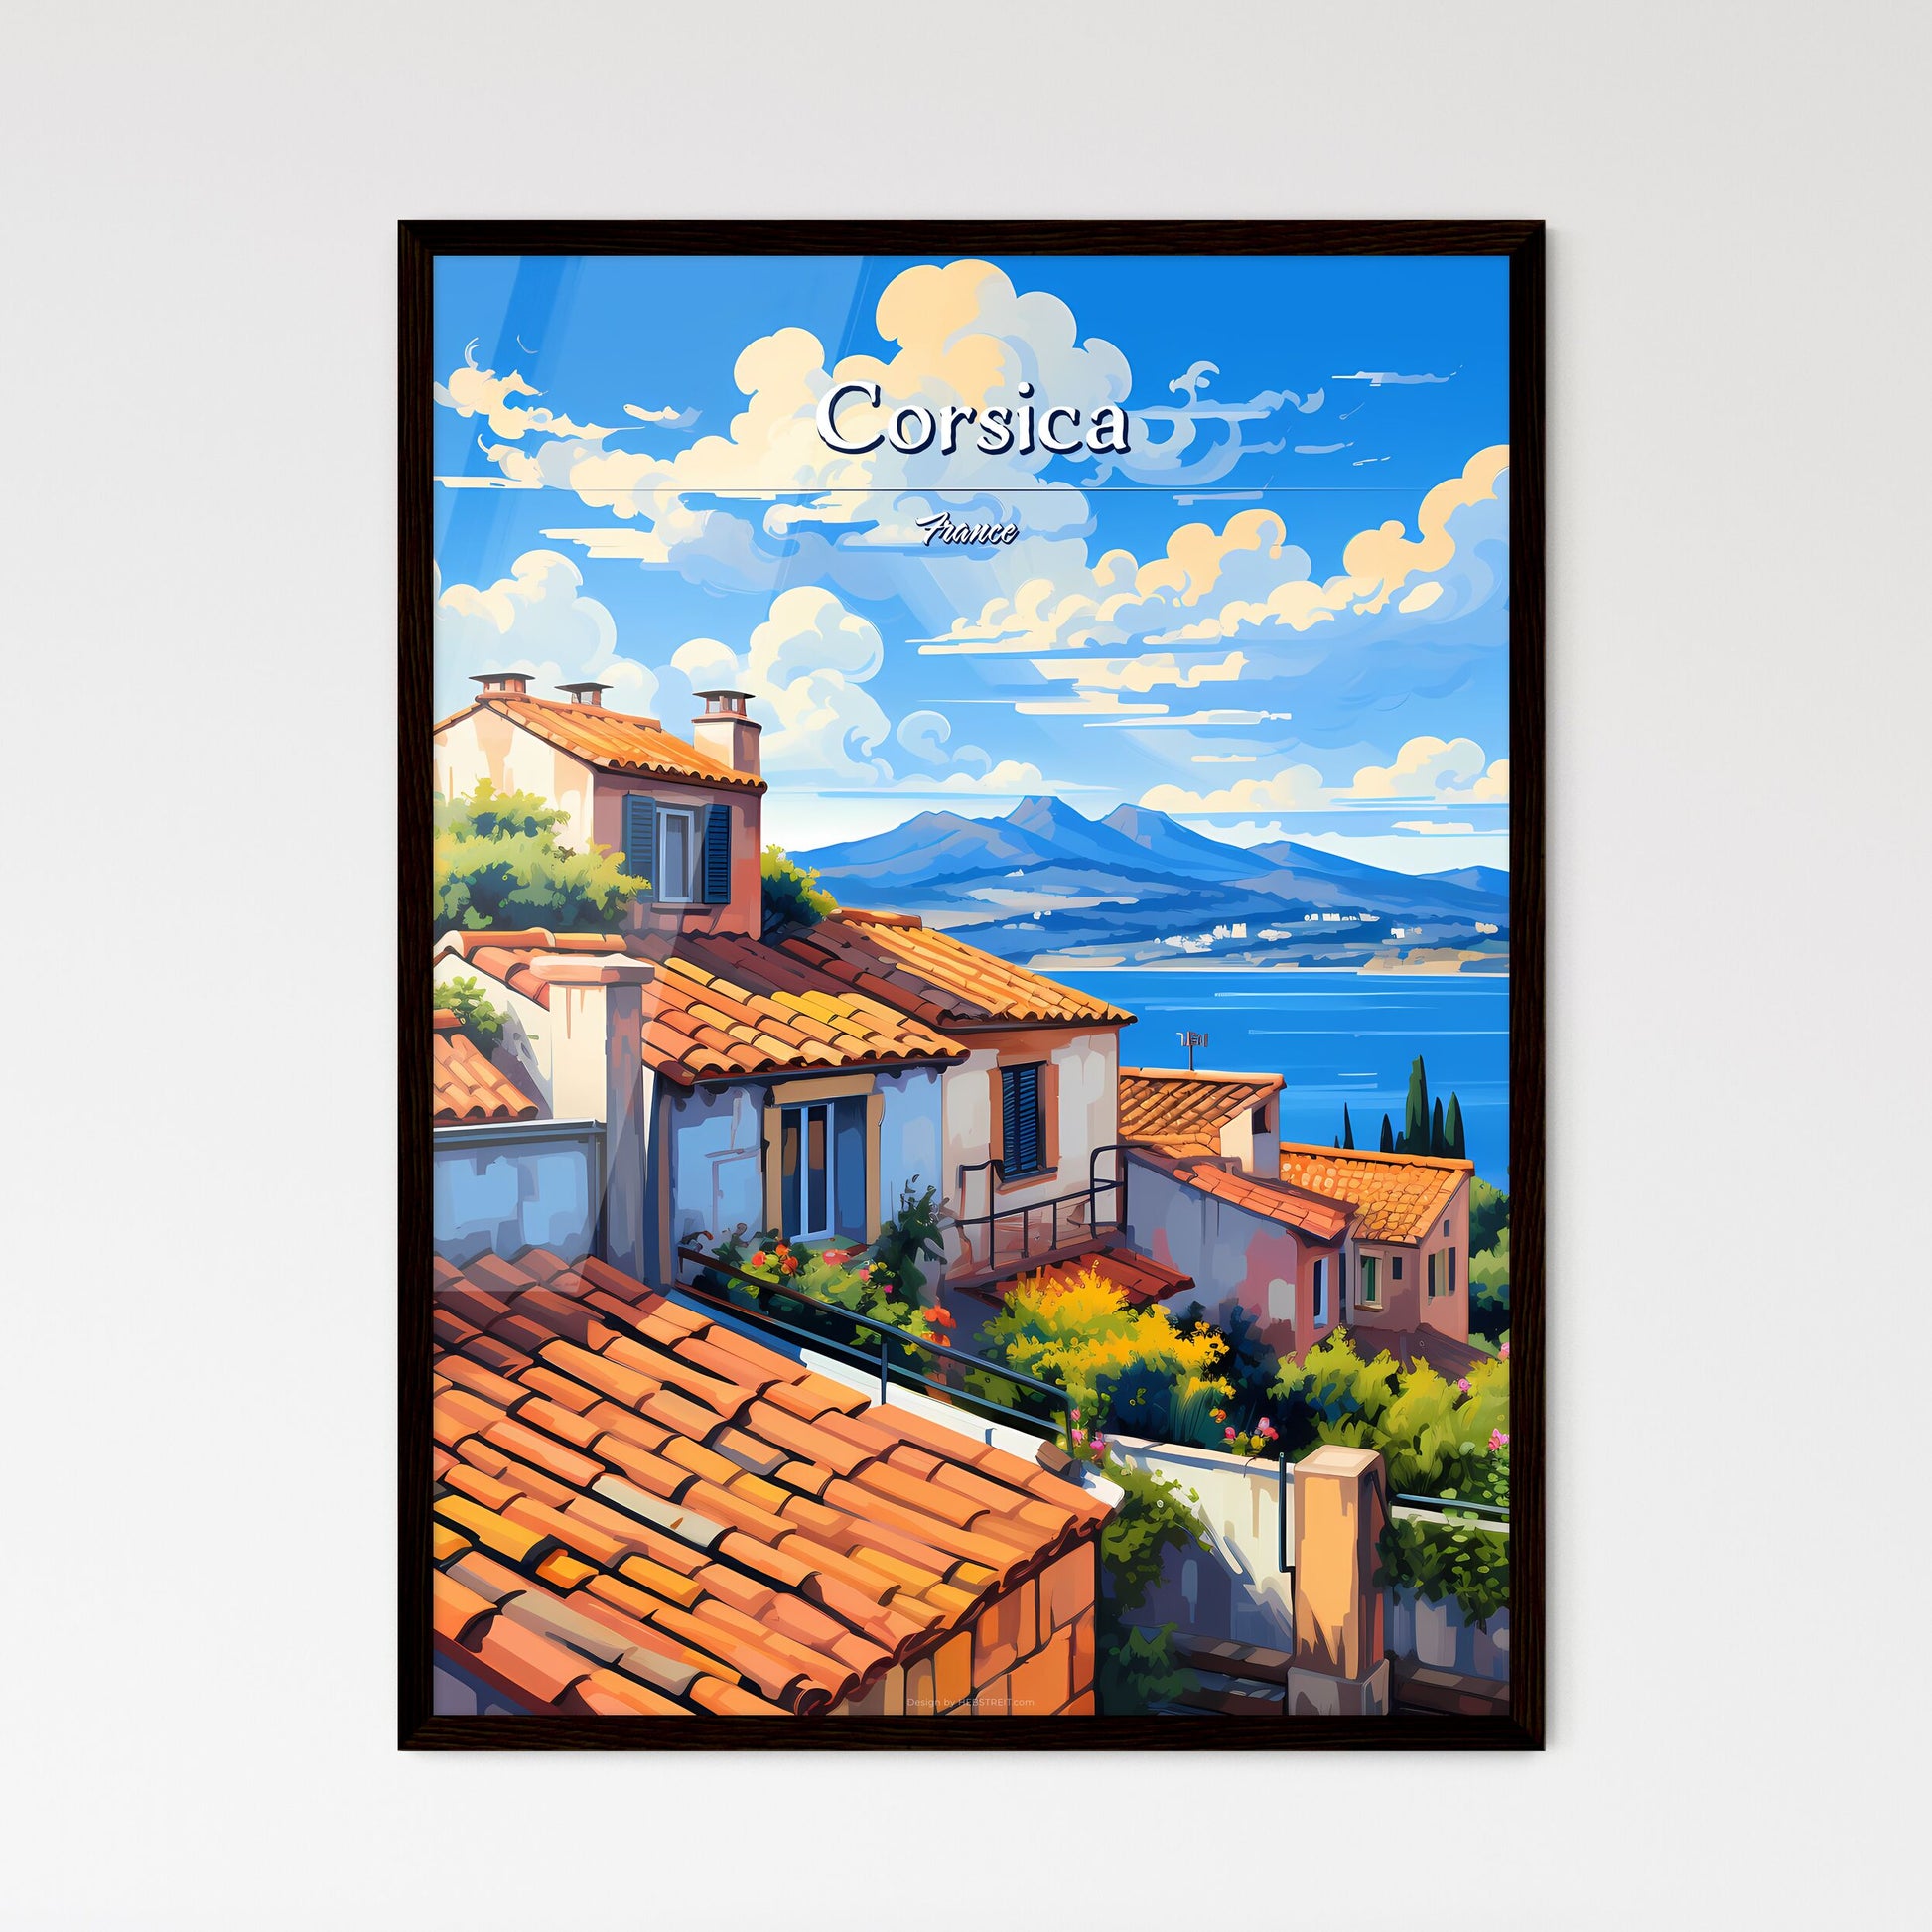 On the roofs of Corsica, France - Art print of a group of houses with trees and plants by a body of water Default Title